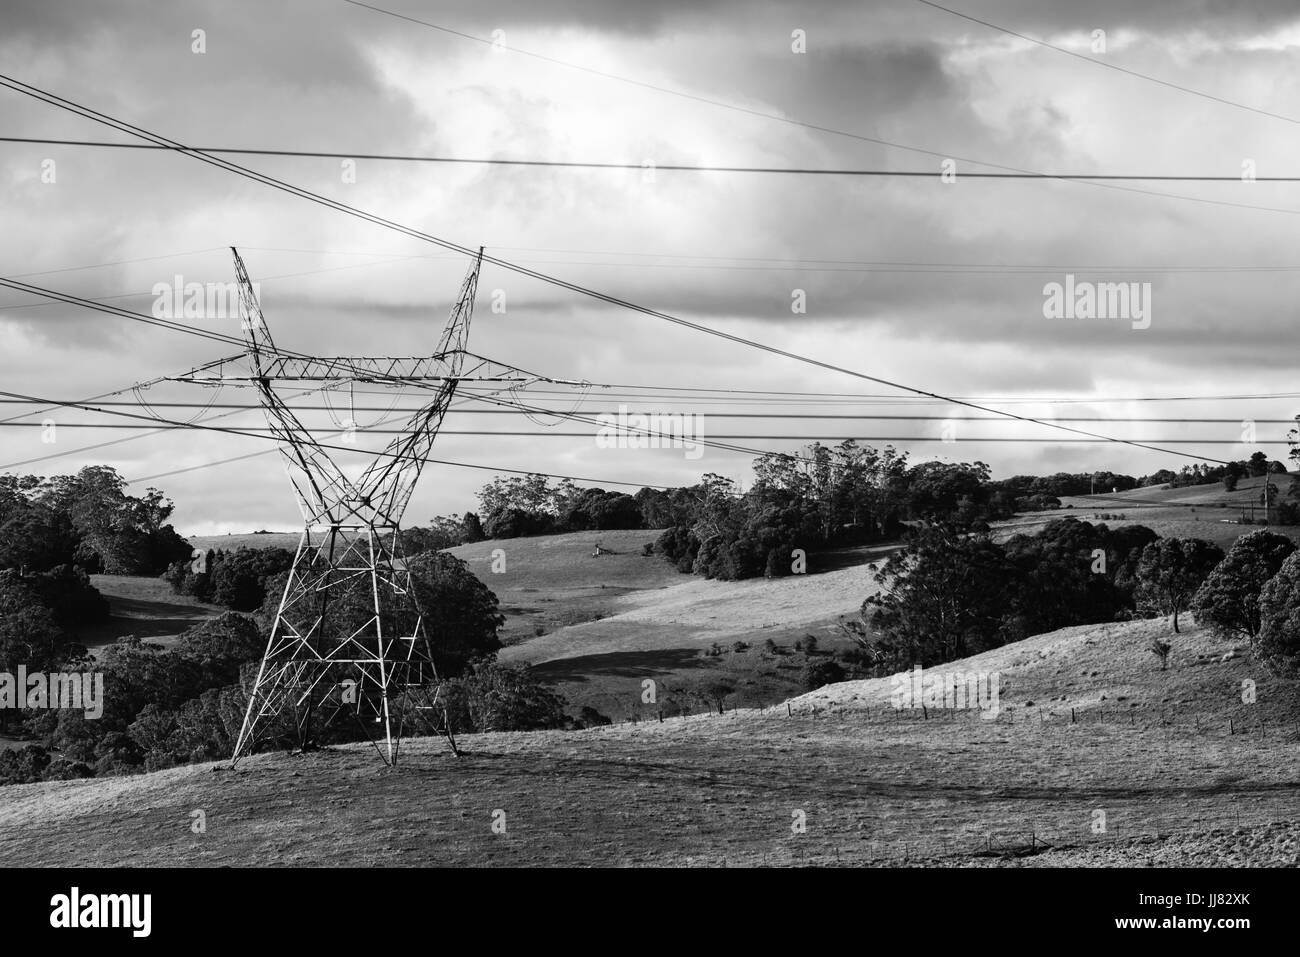 High tension electricity power lines and poles stretching through rural paddocks Stock Photo